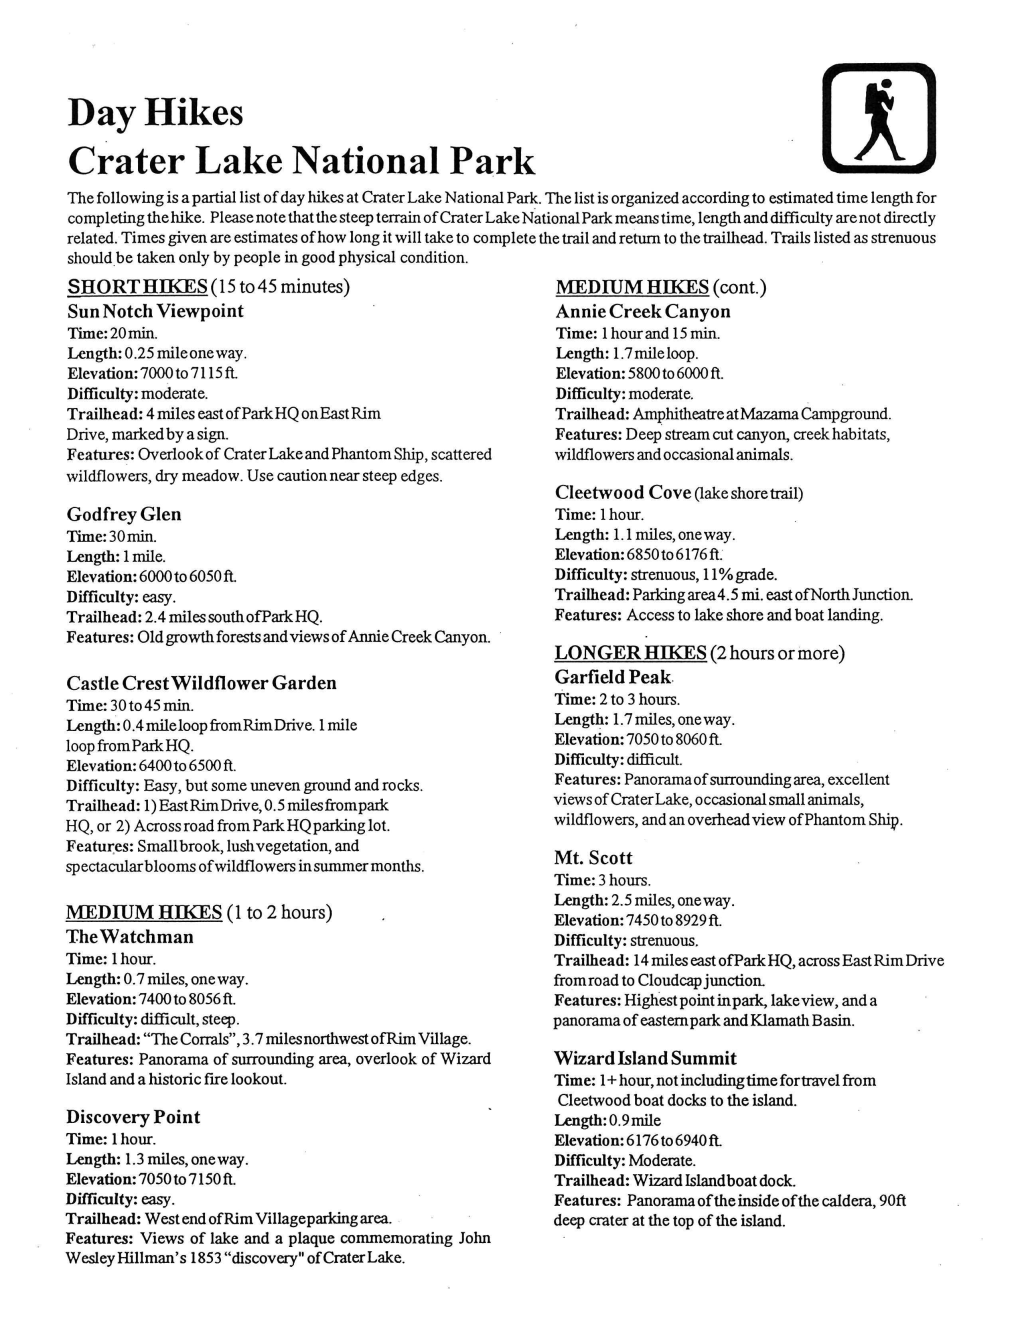 Day Hikes Crater Lake National Park the Following Is a Partial List of Day Hikes at Crater Lake National Park